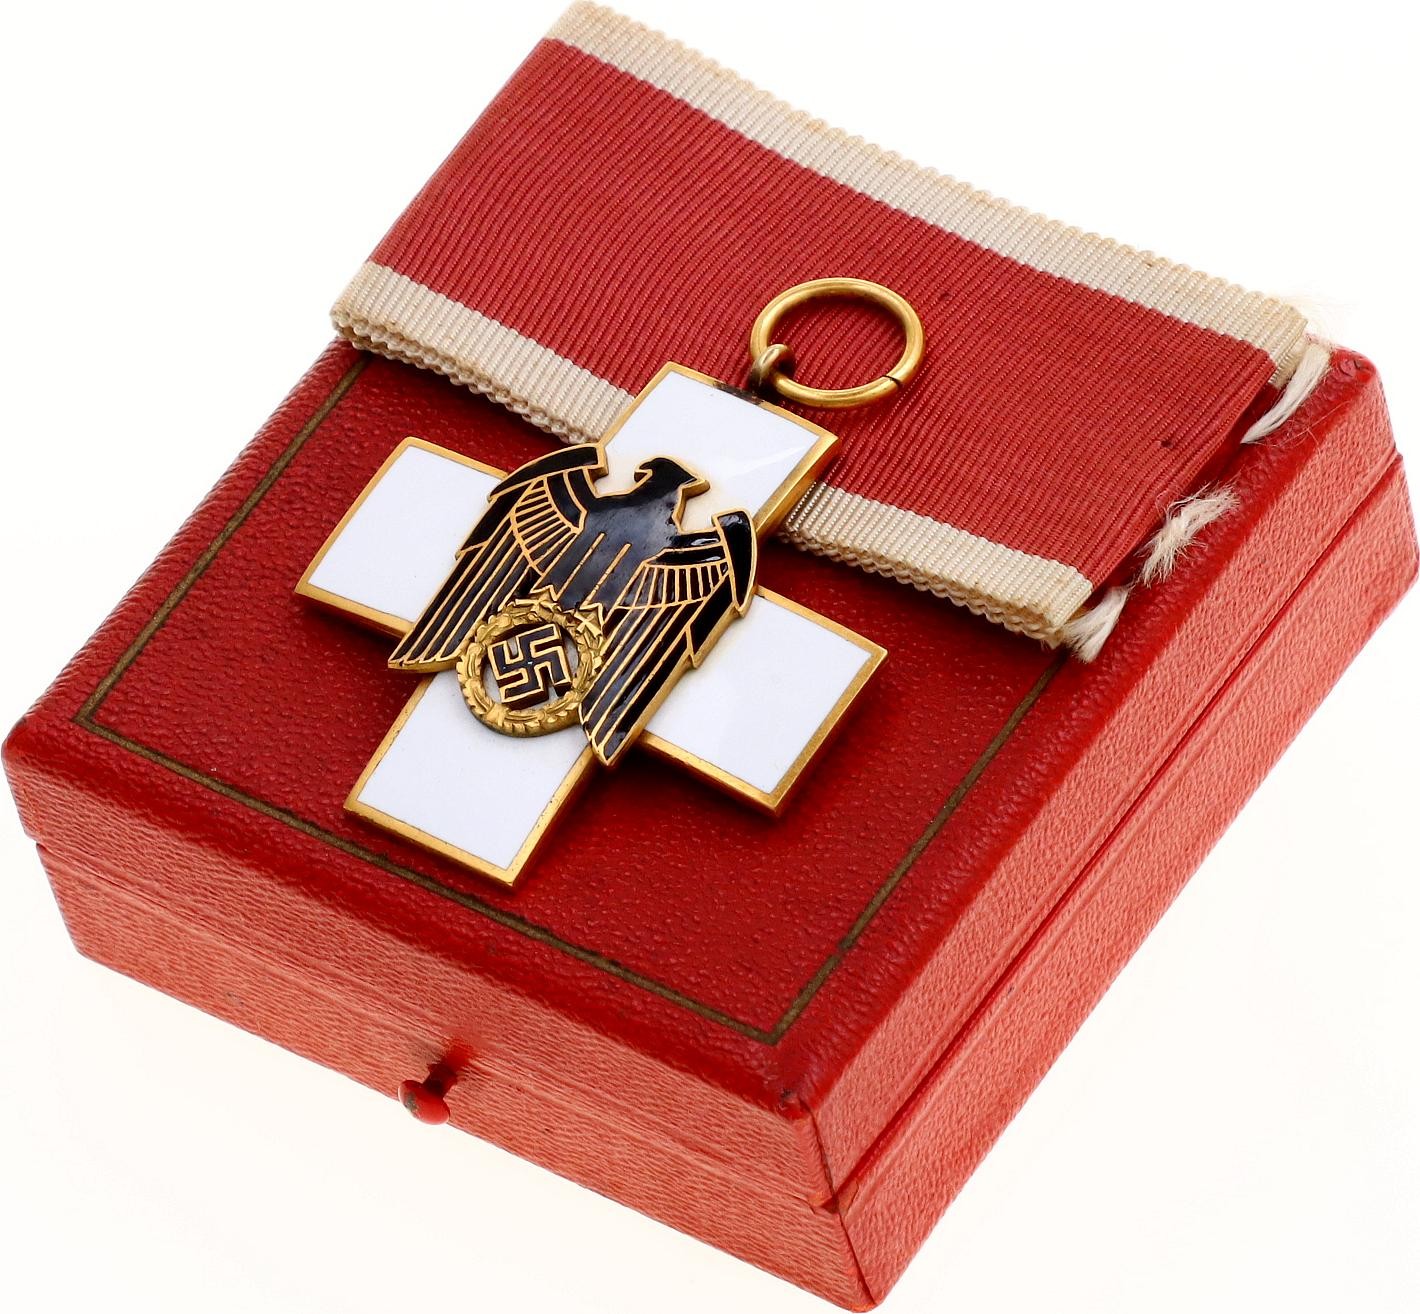 Sold at Auction: WWII GERMAN THIRD REICH IRON CROSS CIGARETTE CASE